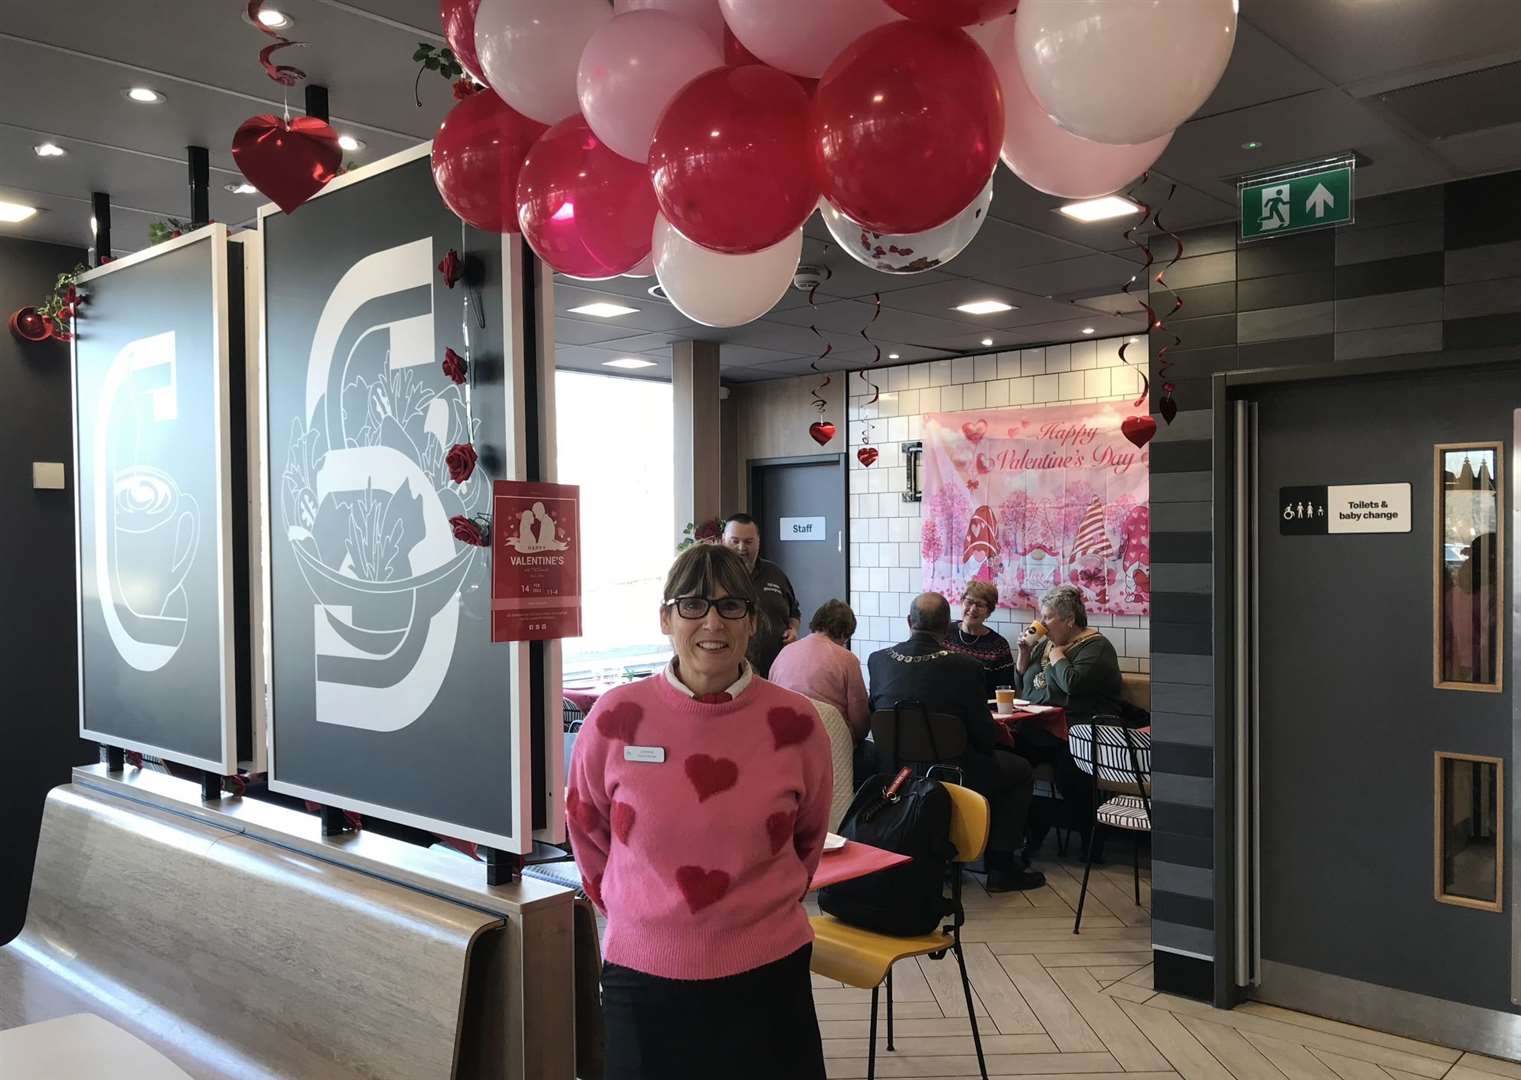 Lorraine Knell organised the event to help celebrate her customers happy relationships